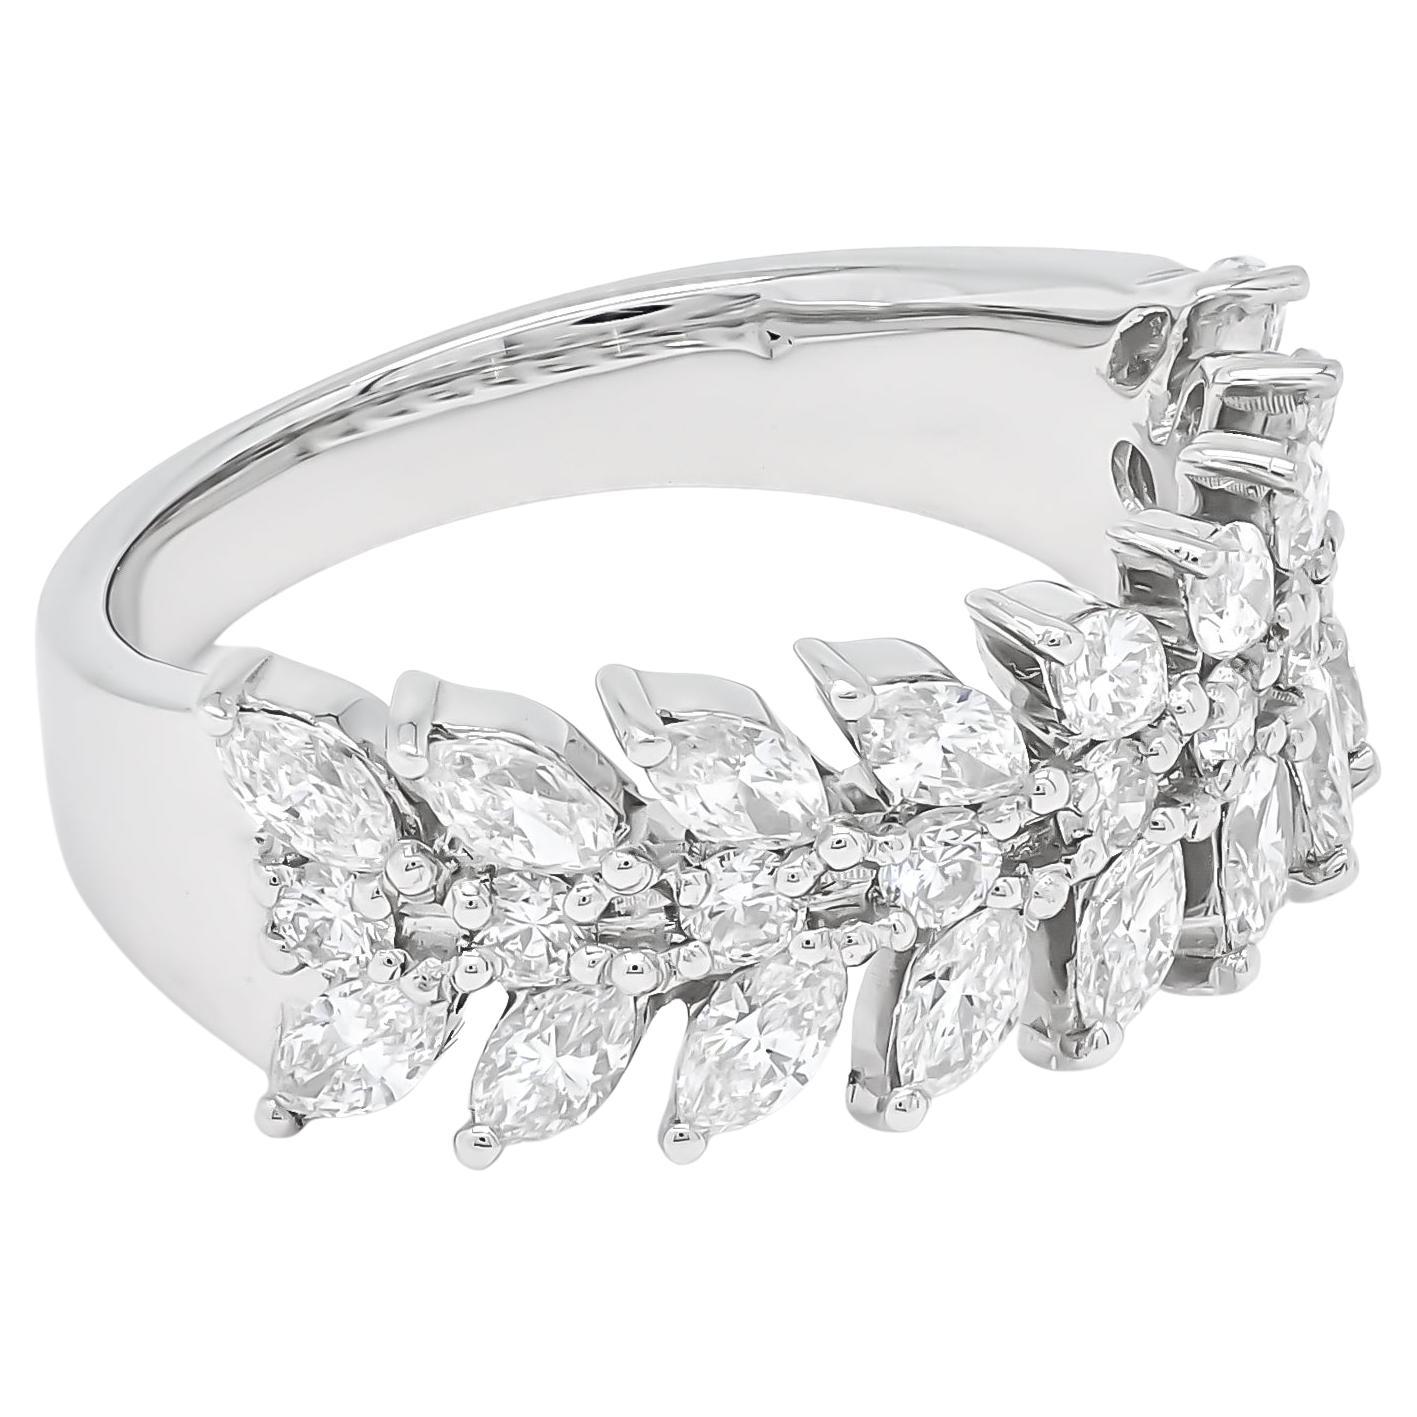 If you're looking for the perfect anniversary gift to surprise your wife and show her just how much you love her, consider a Marquise diamond prong 18 kt White gold ring. This exquisite piece features a stunning Marquise diamond, cut to maximize its